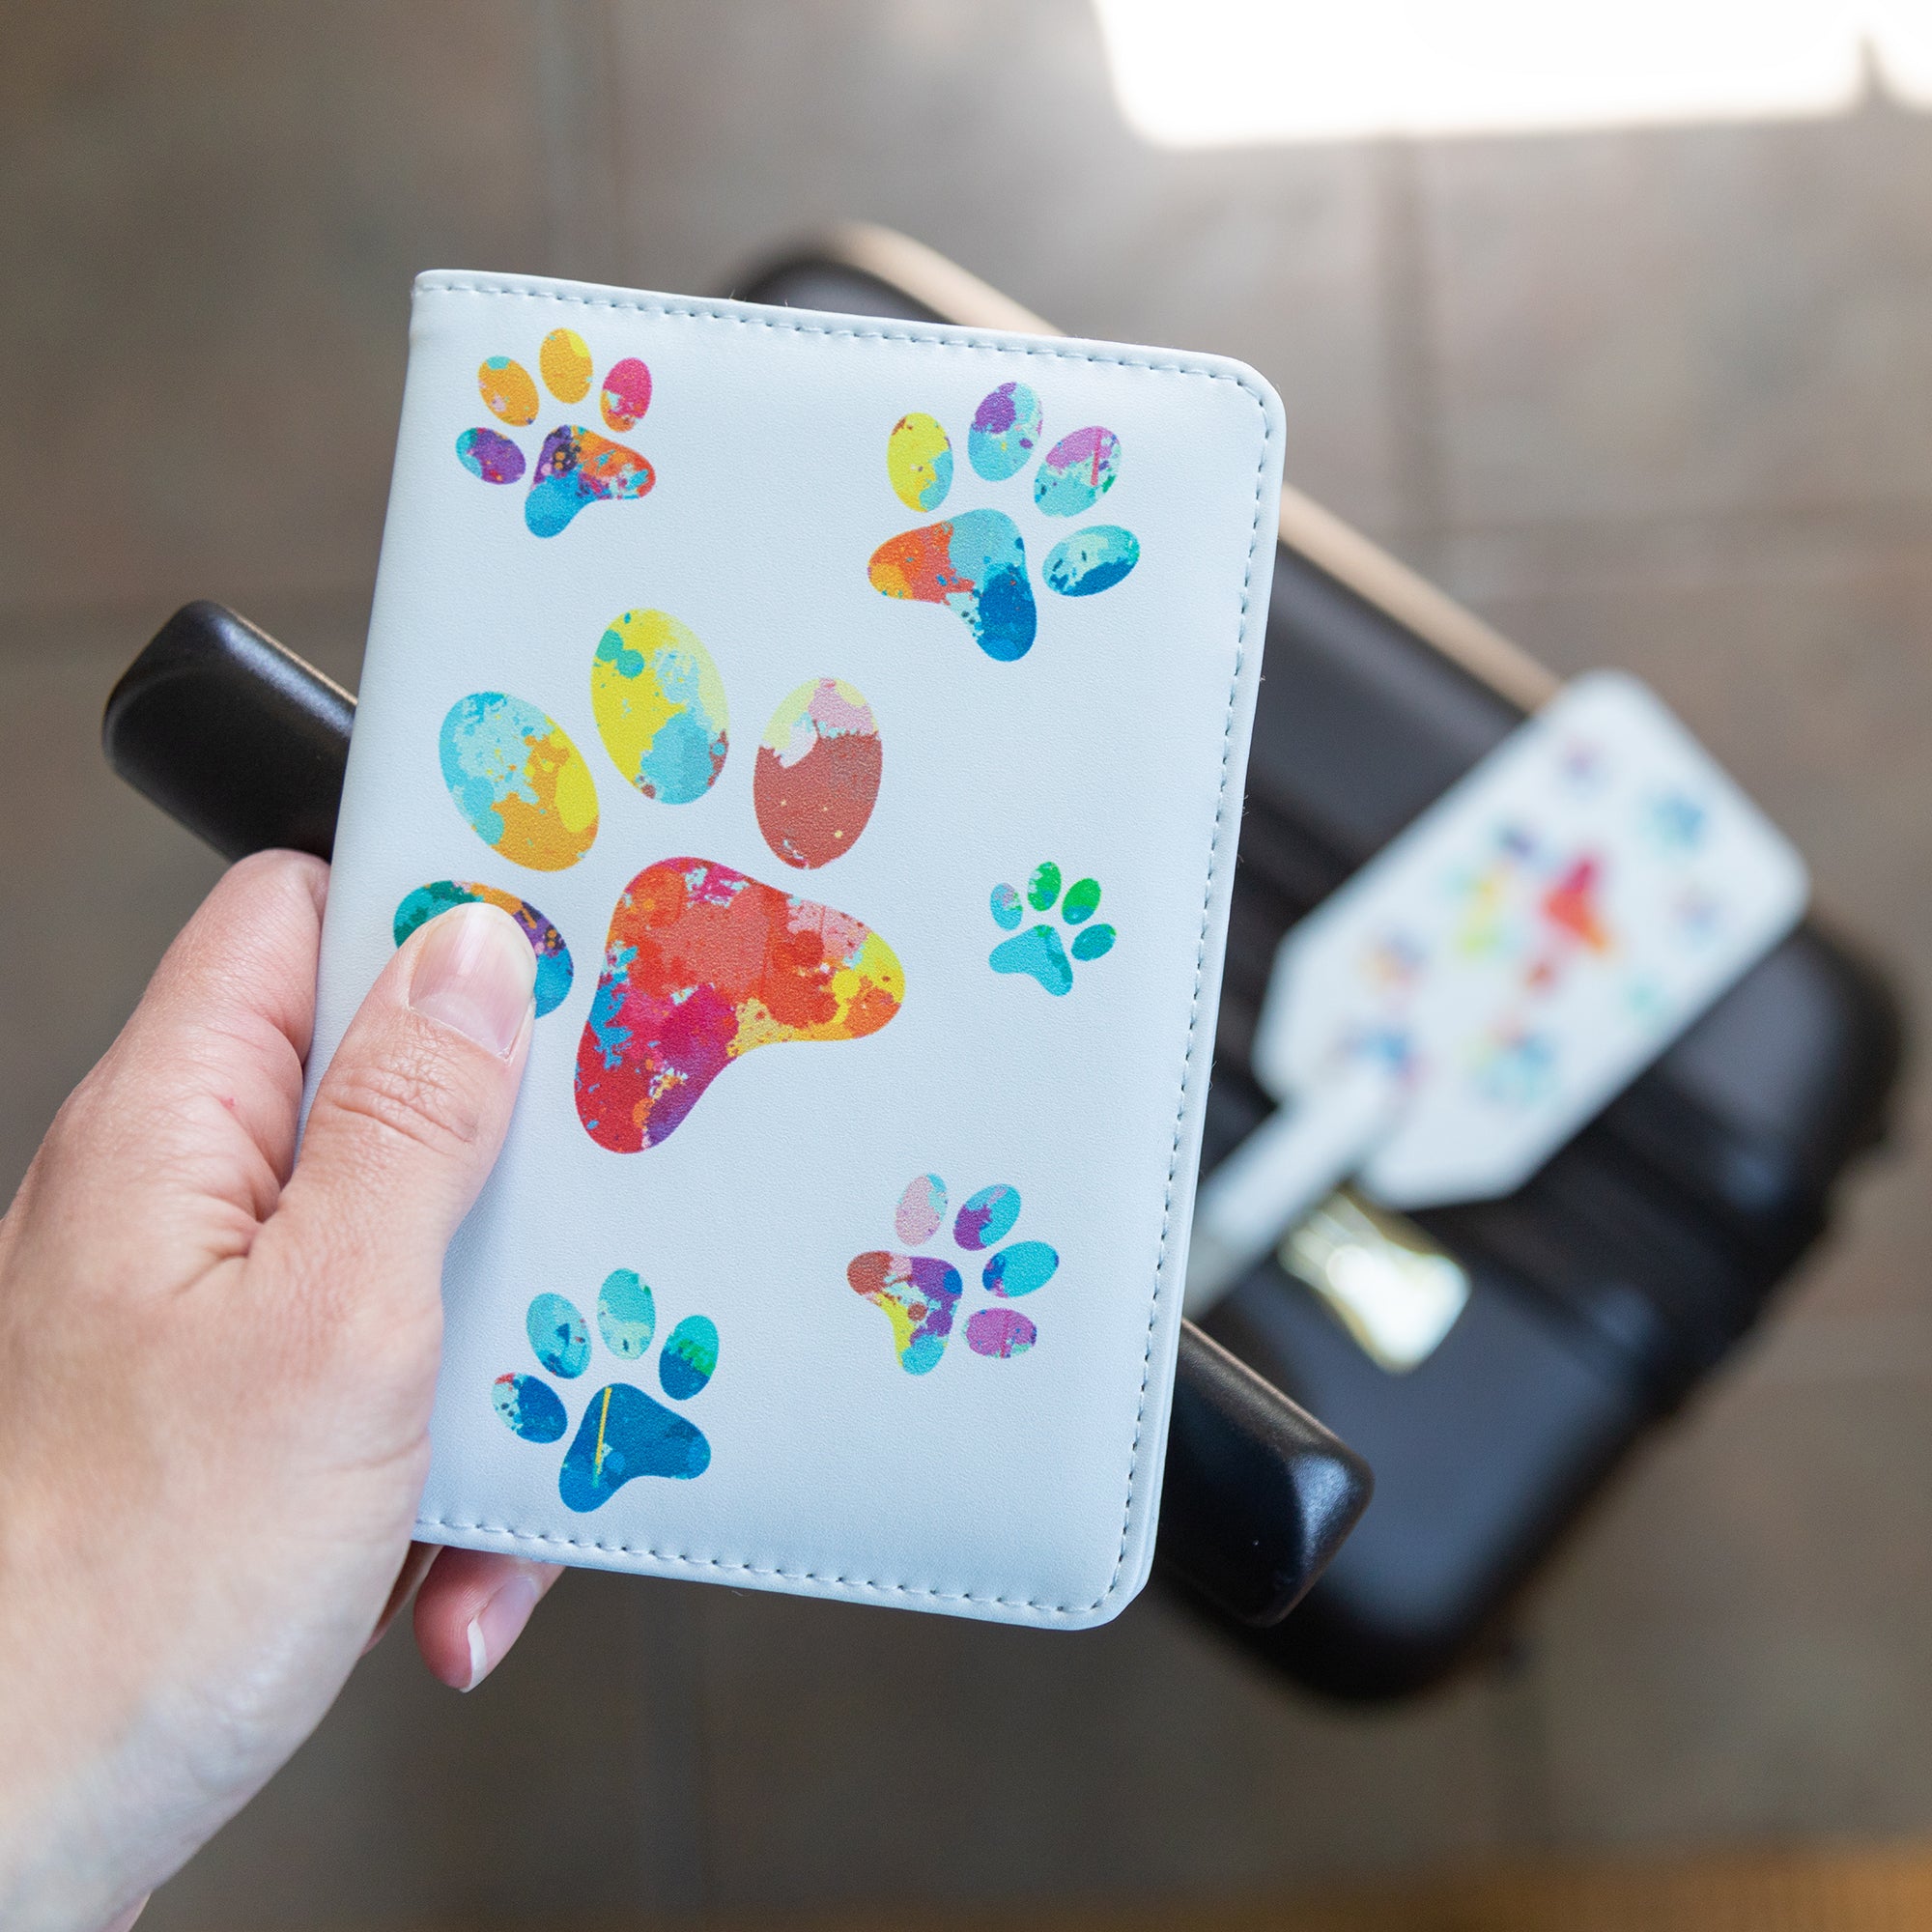 Pawsitively Time To Travel Luggage Tag & Passport Holder - Luggage Tag & Passport Holder Set